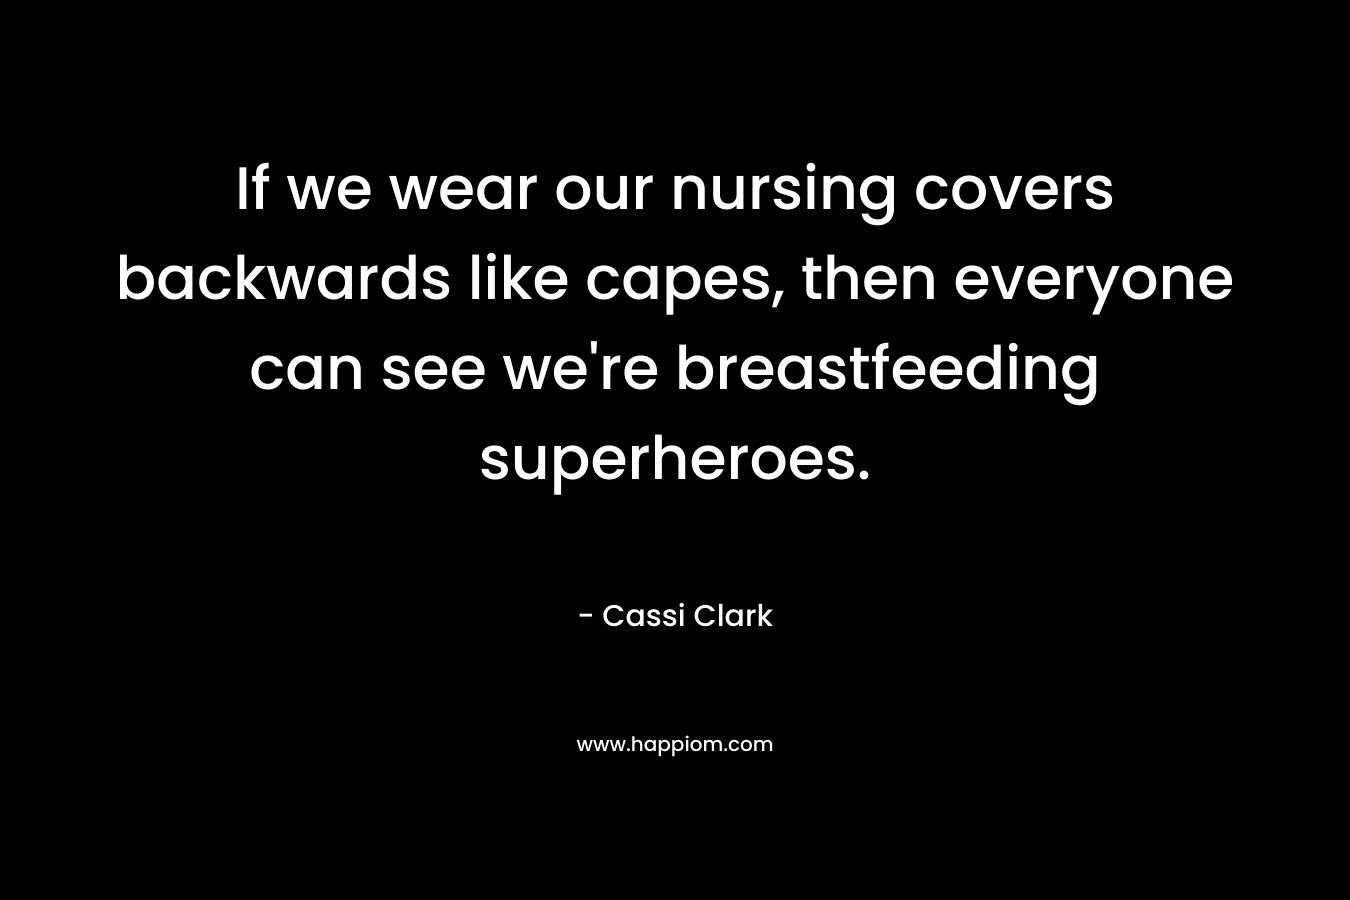 If we wear our nursing covers backwards like capes, then everyone can see we’re breastfeeding superheroes. – Cassi Clark